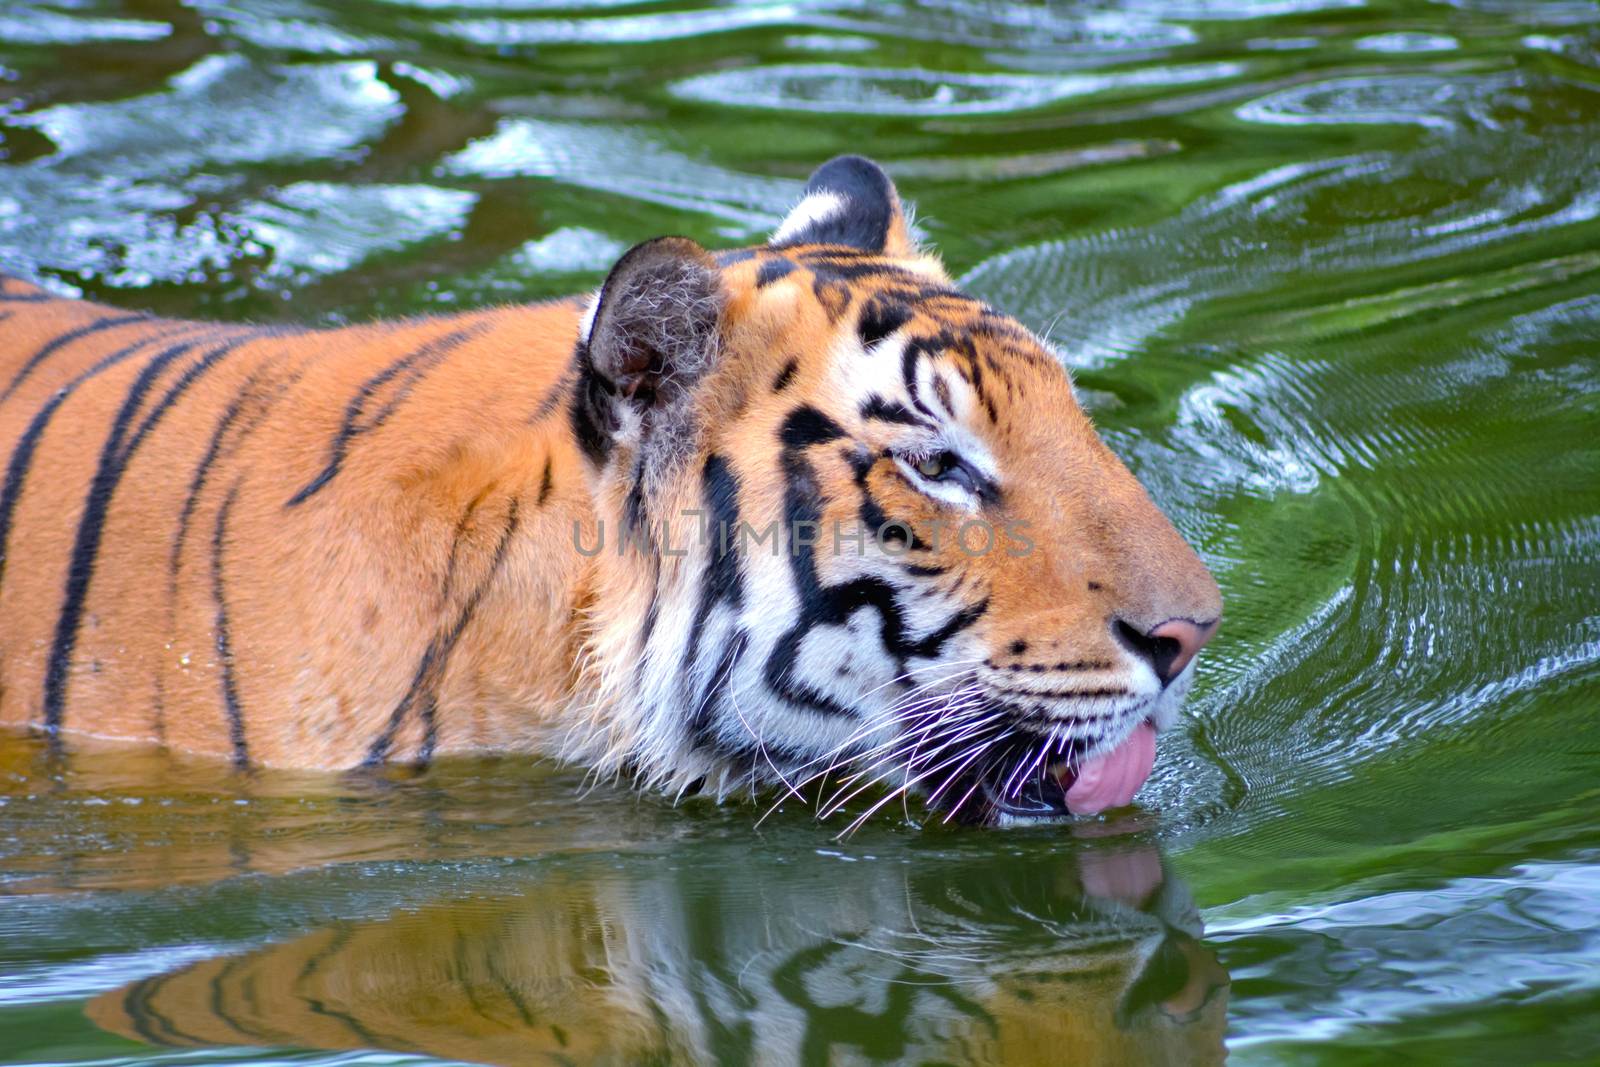 Tiger swimming in water with open tongue by rkbalaji